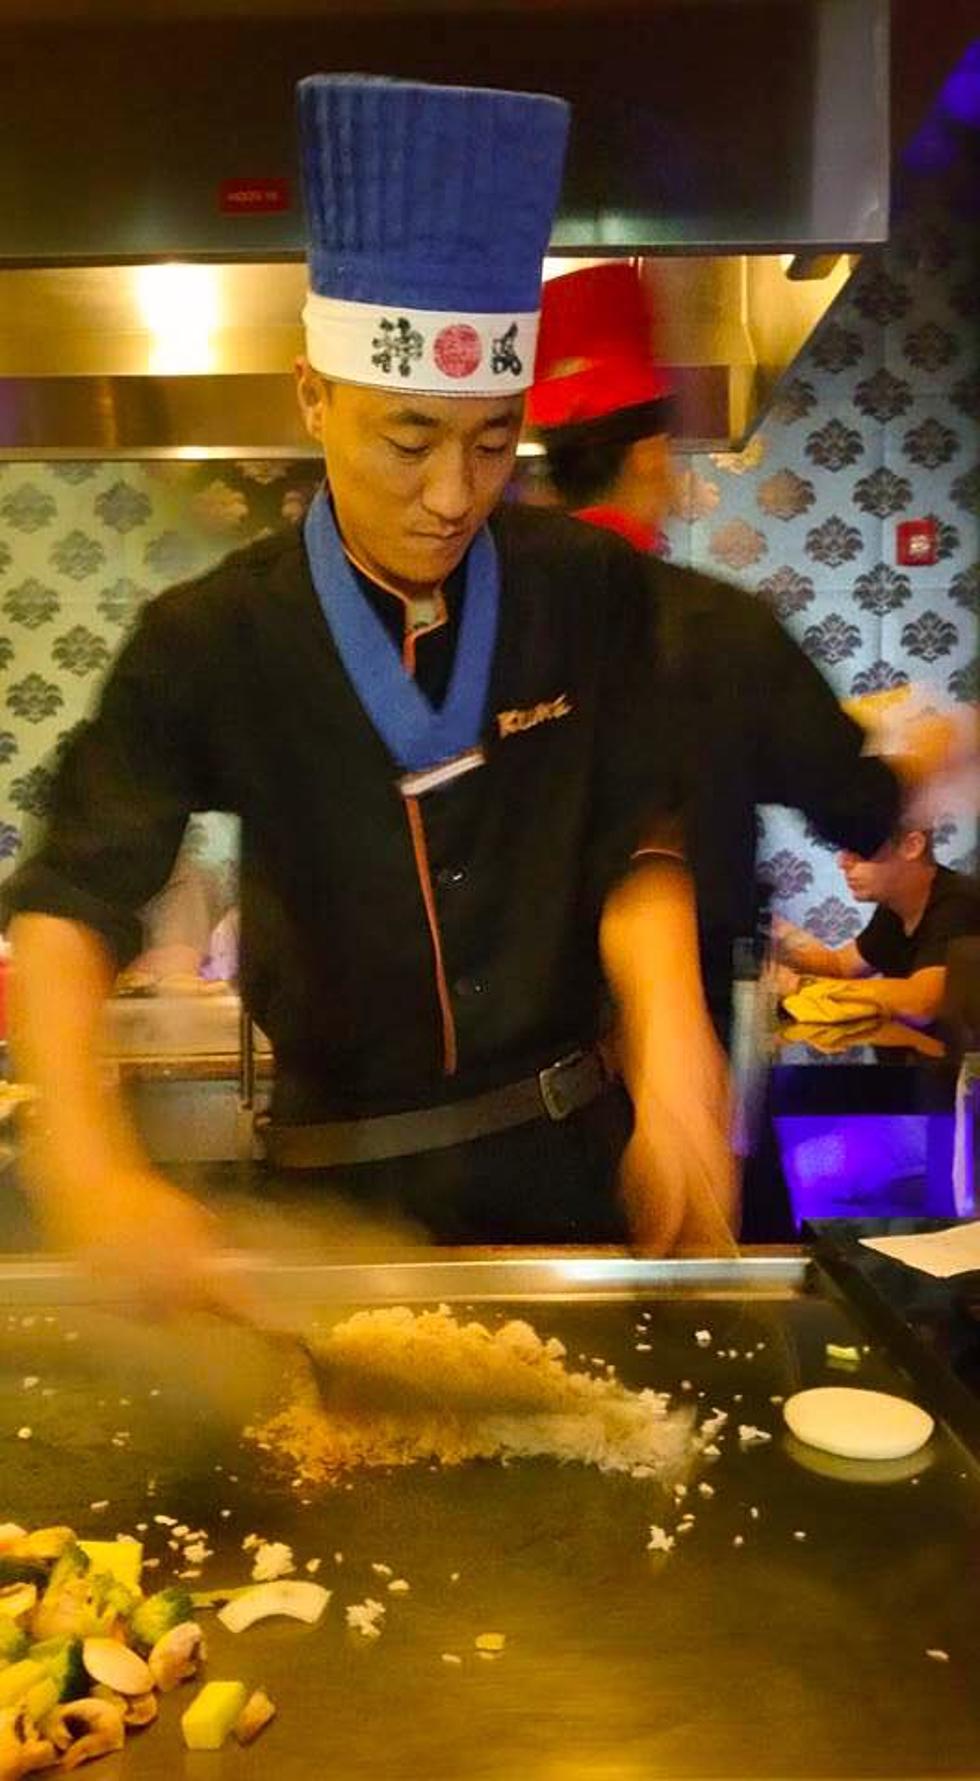 New Japanese Steak House/Sushi Bar Set To Open In Augusta